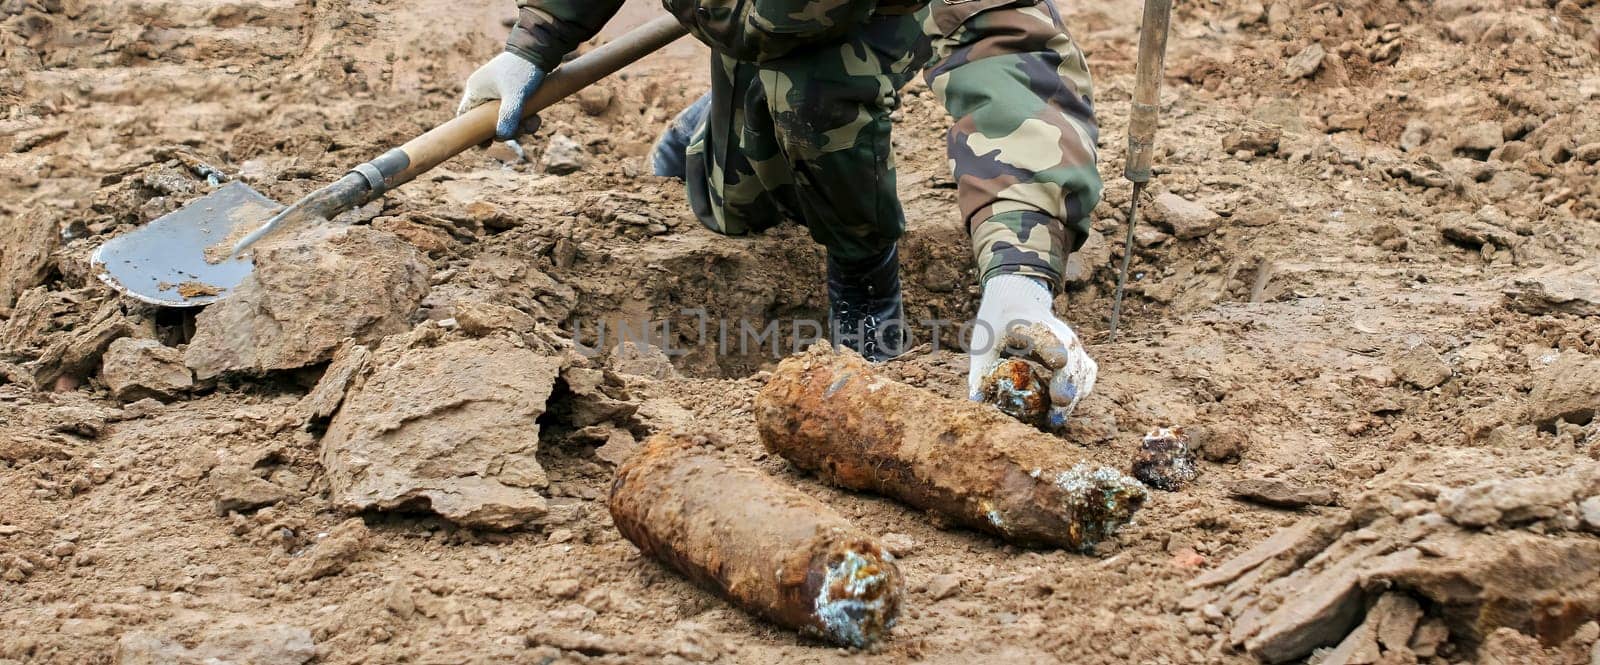 Military personnel extracting live mortar shell during demining operation by Hil